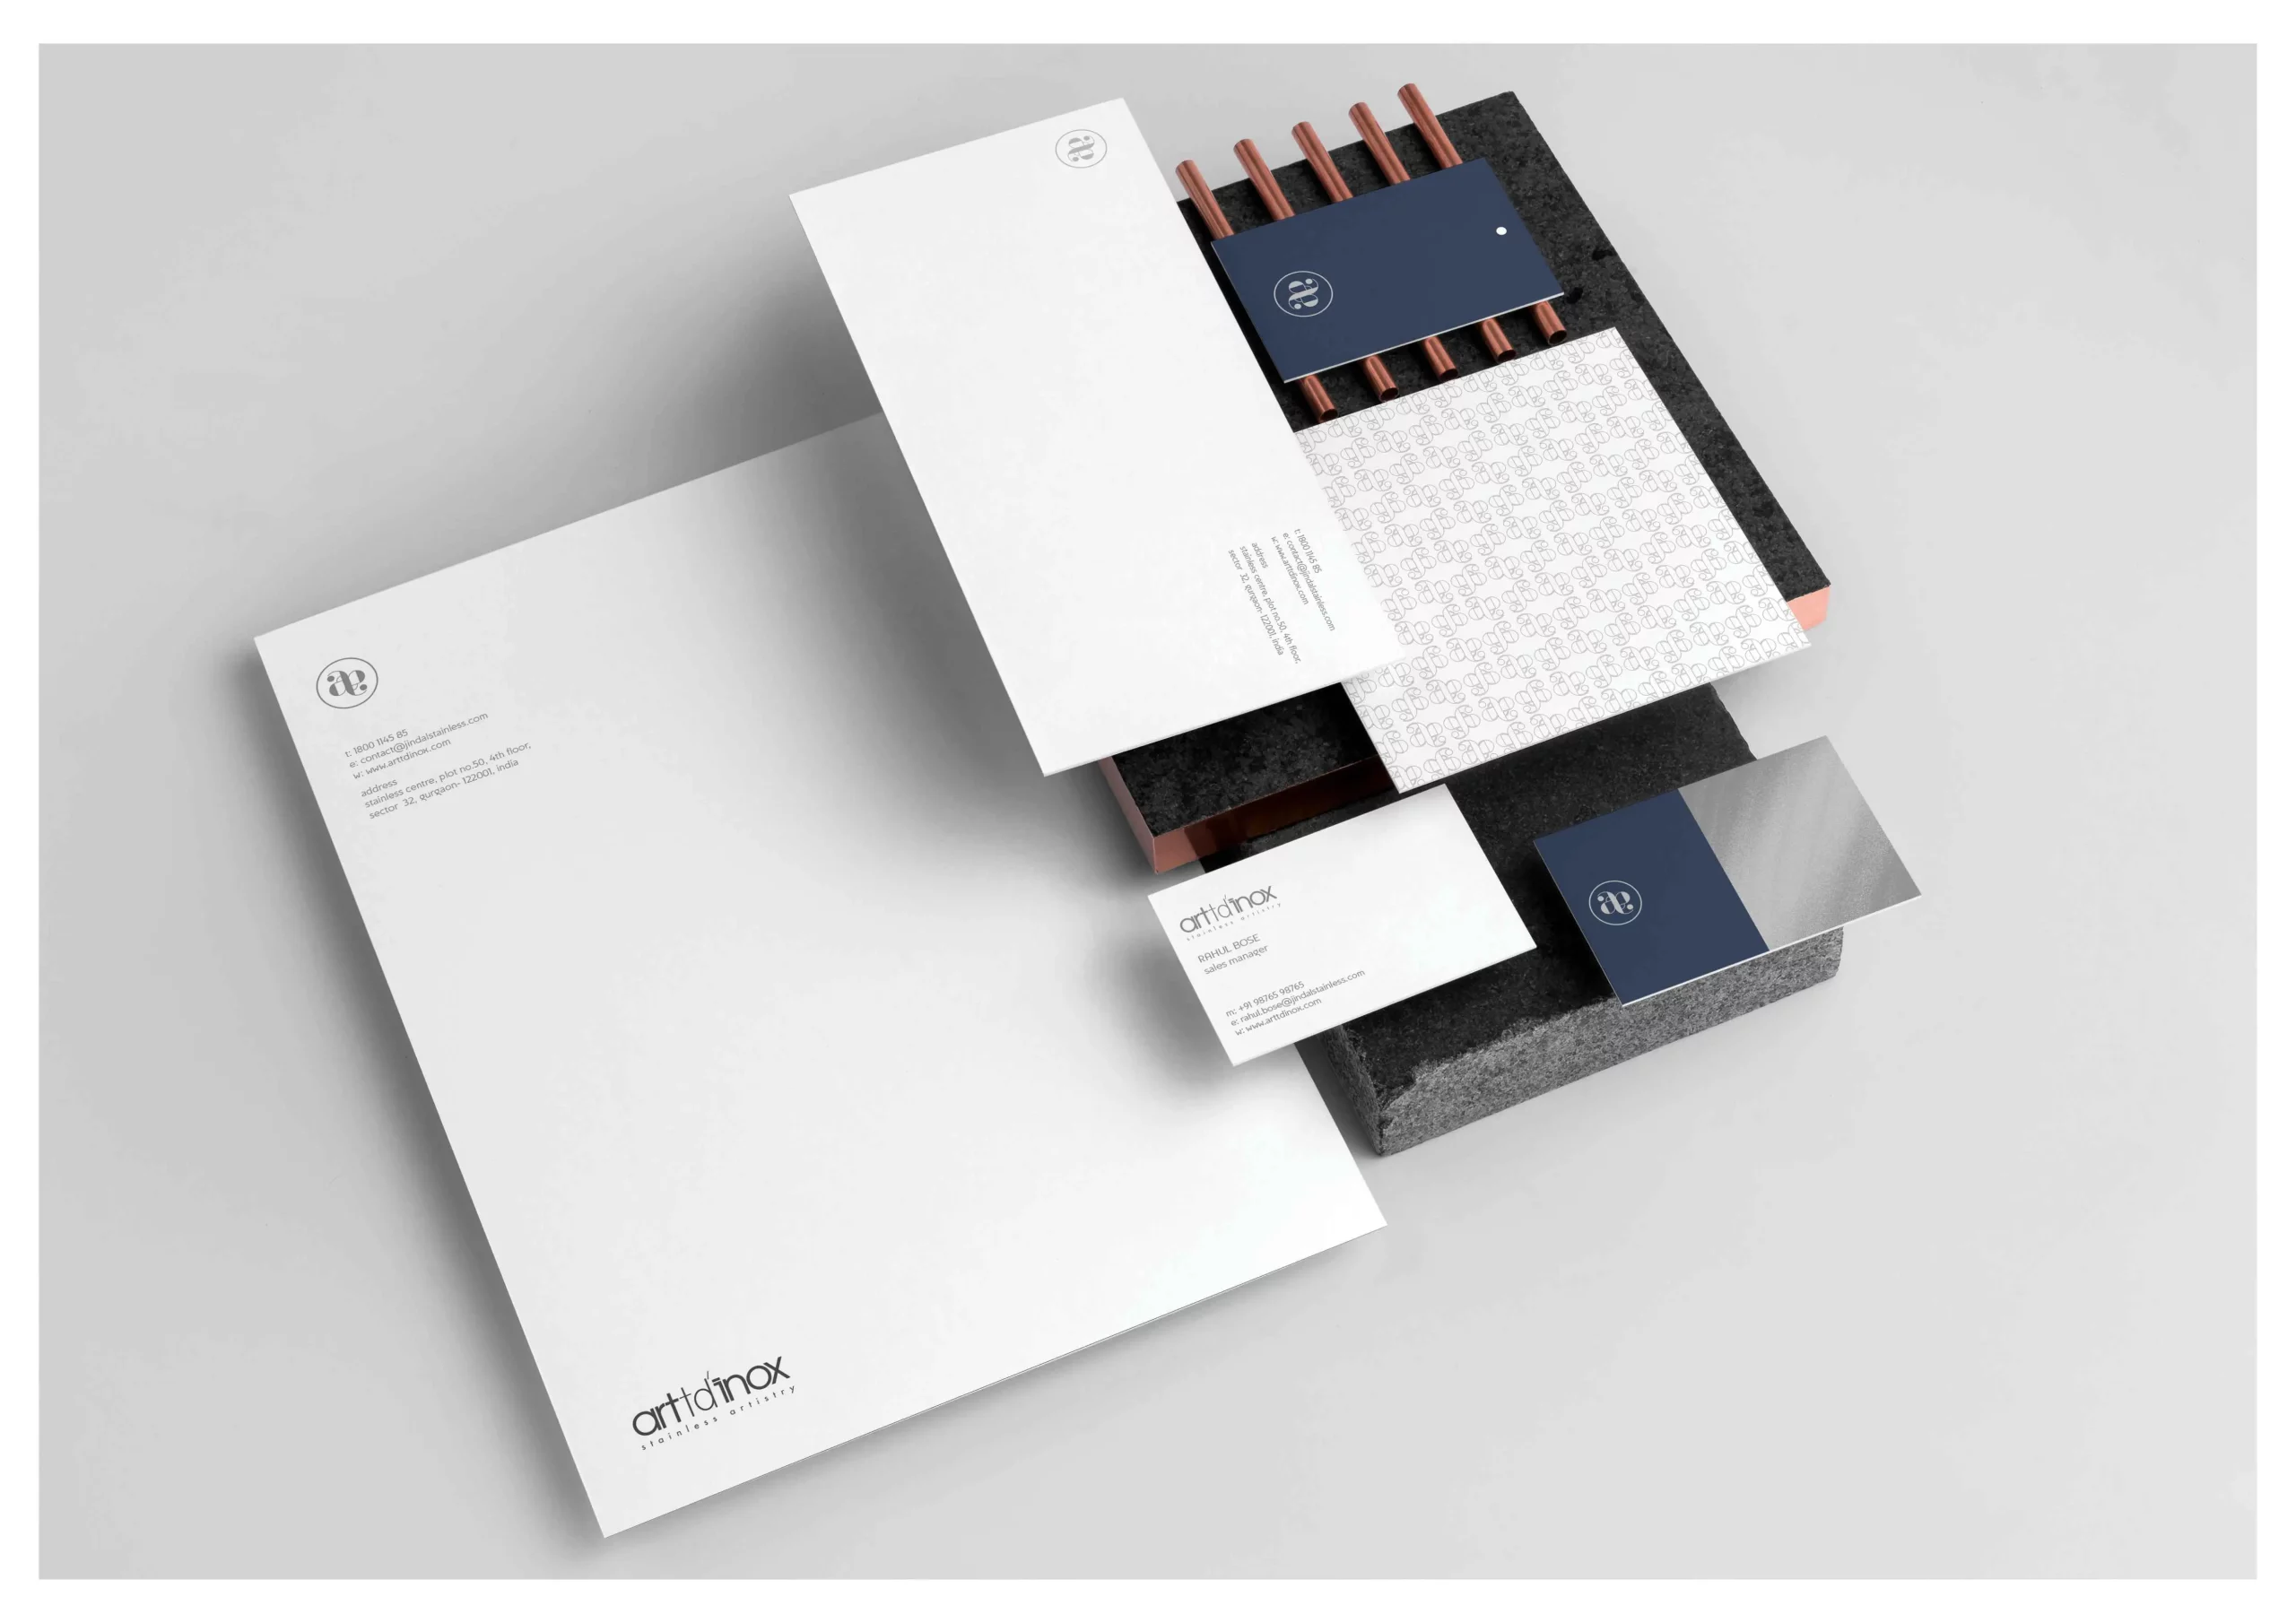 A set of business cards and stationery on a white surface.